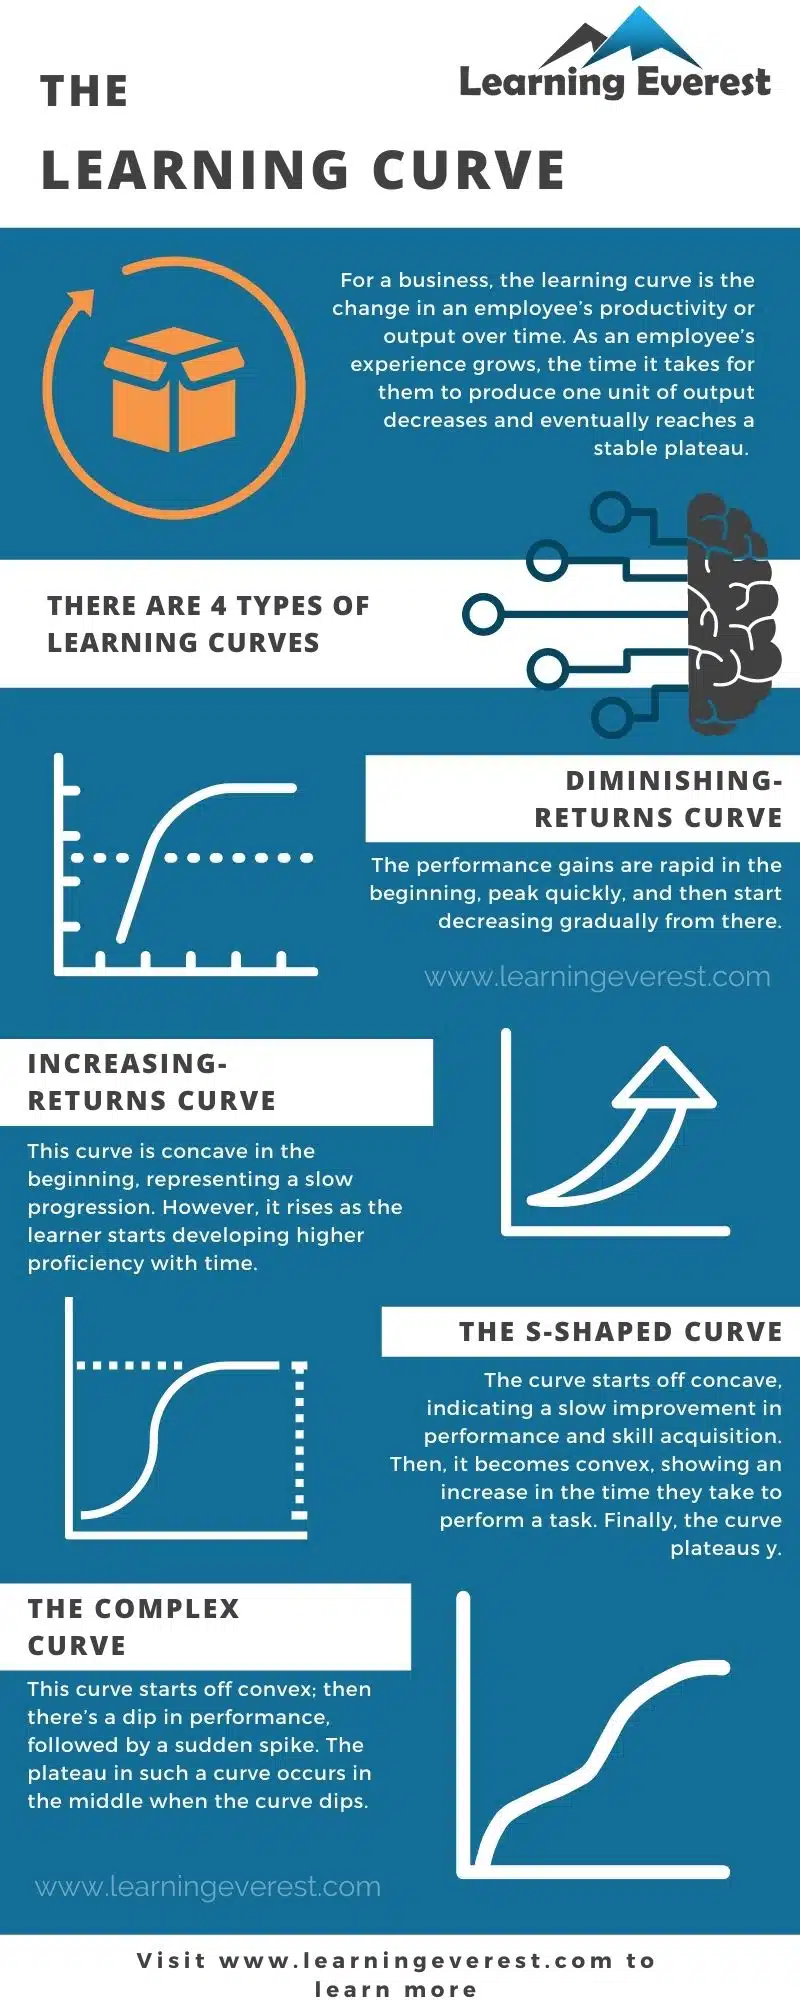 The Learning Curve in Corporate Training